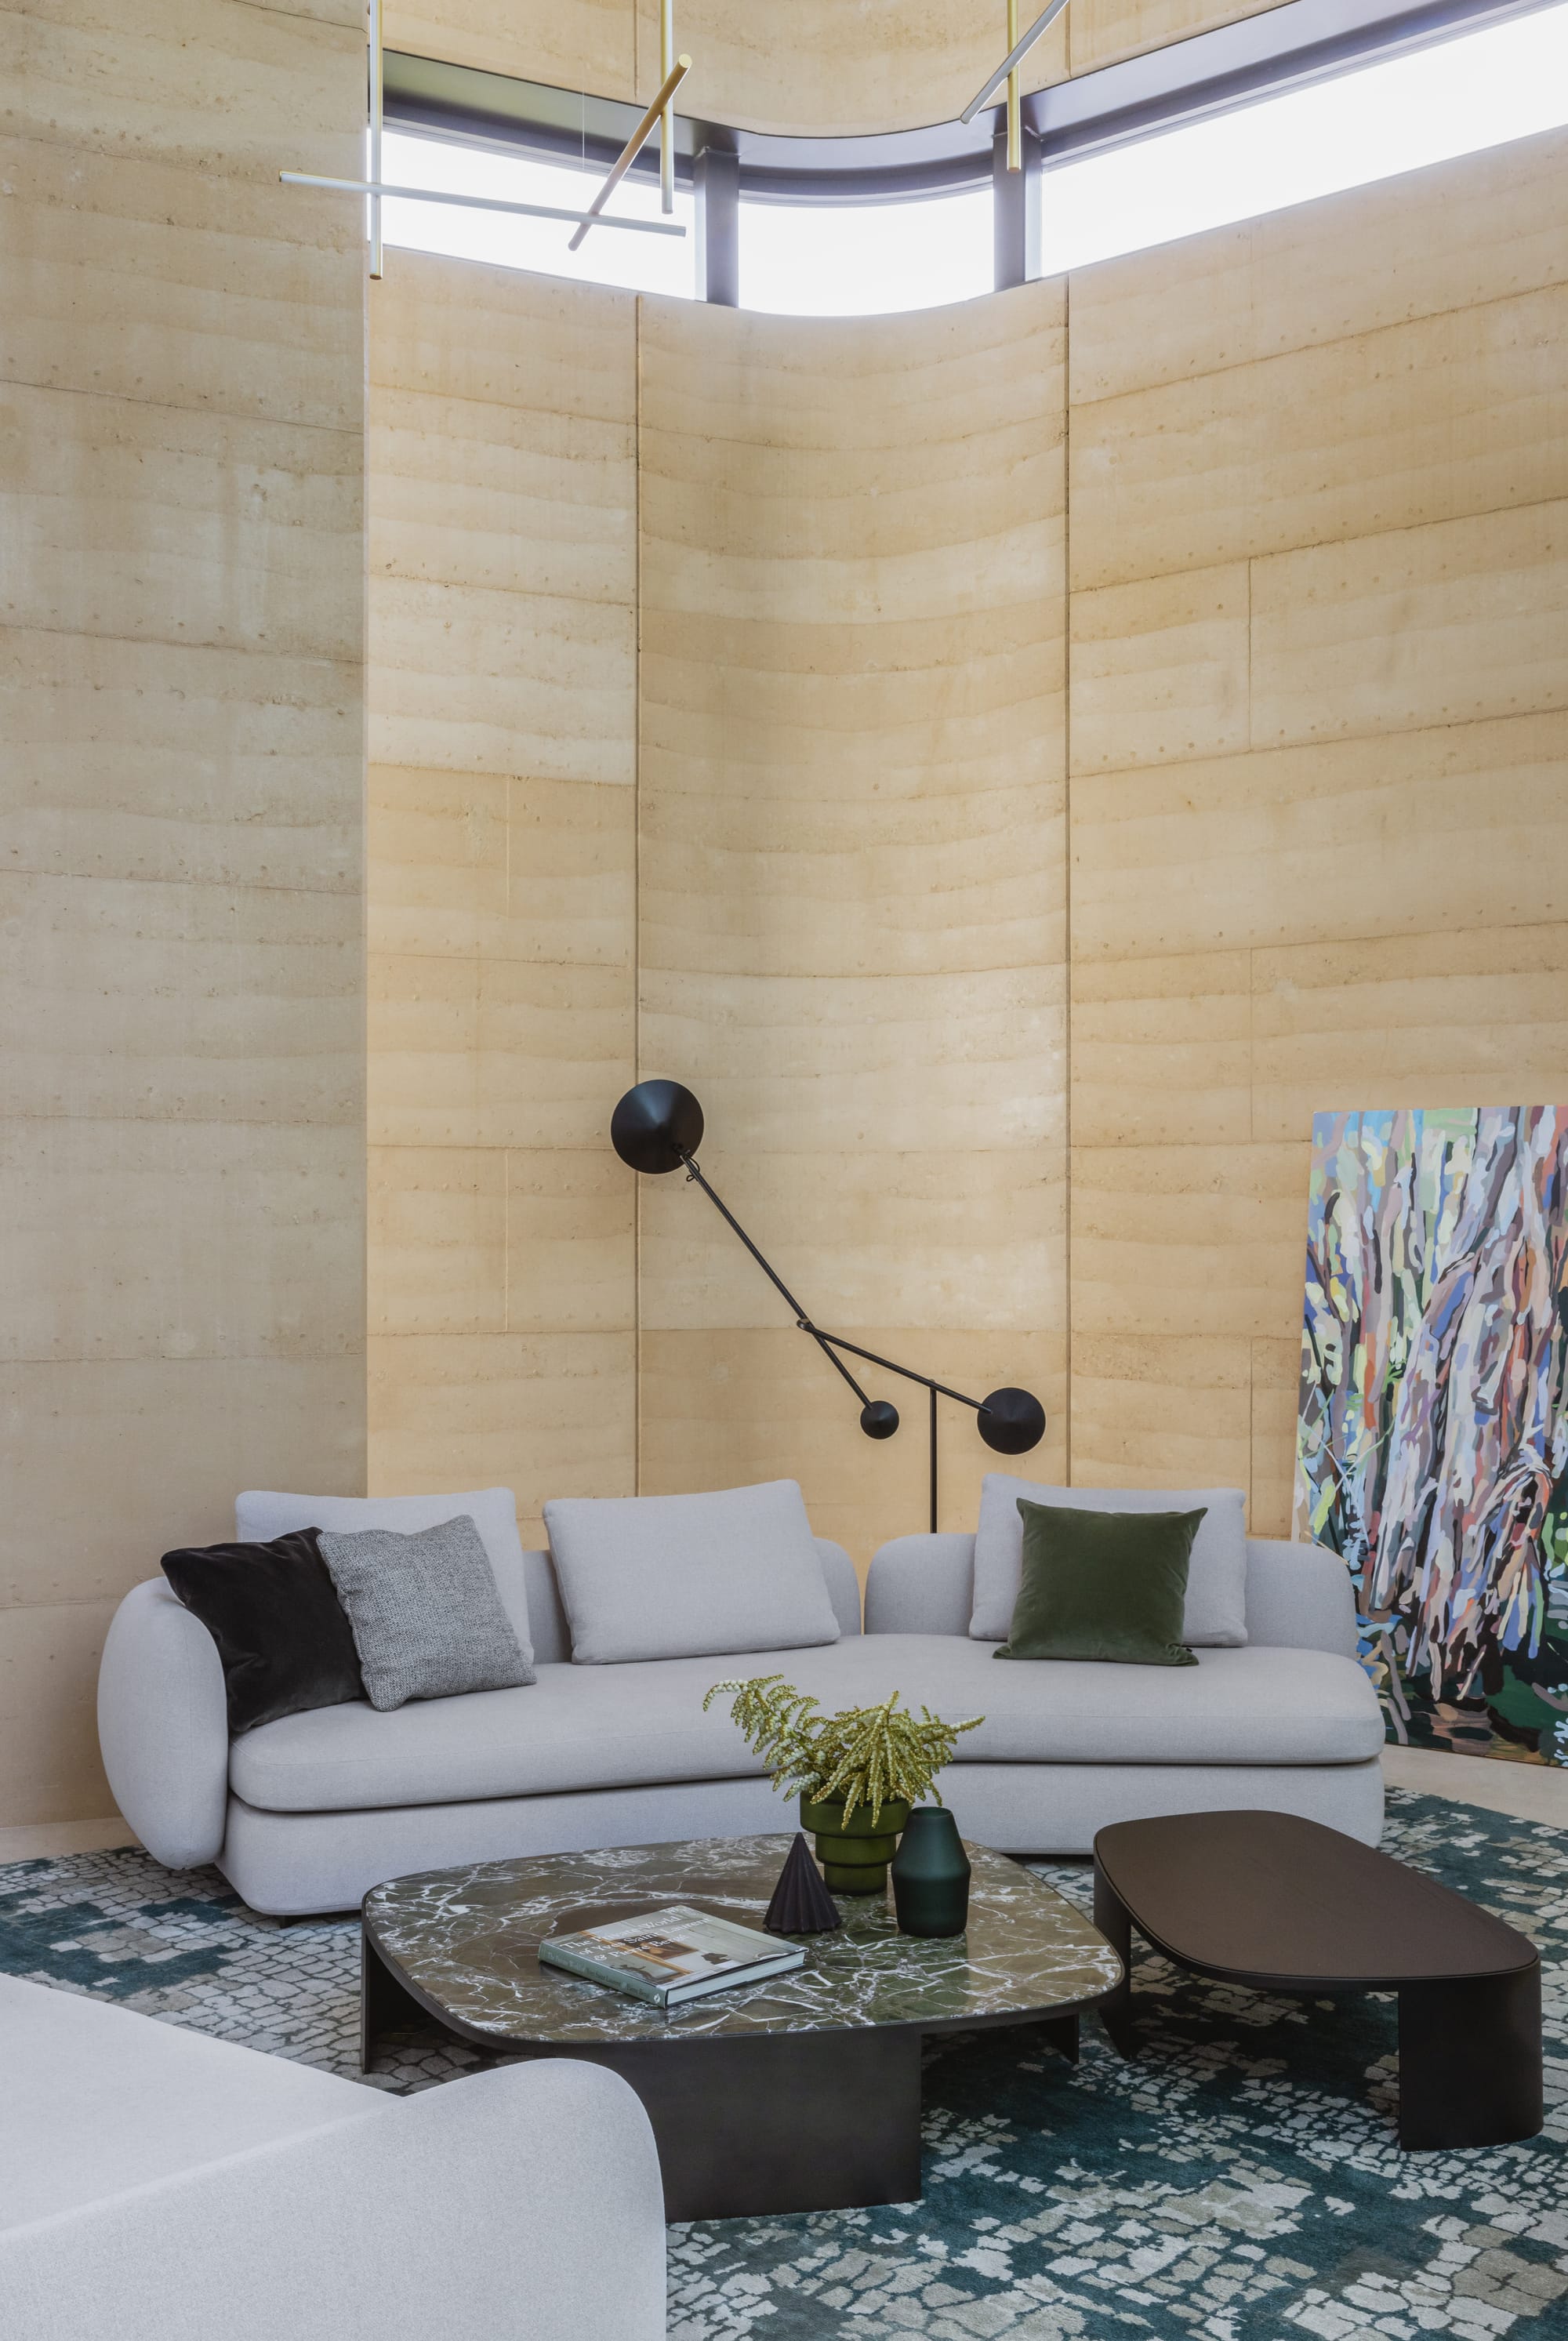 Kenneth Street by Design Studio Group showing the internal rammed earth walls and living room space